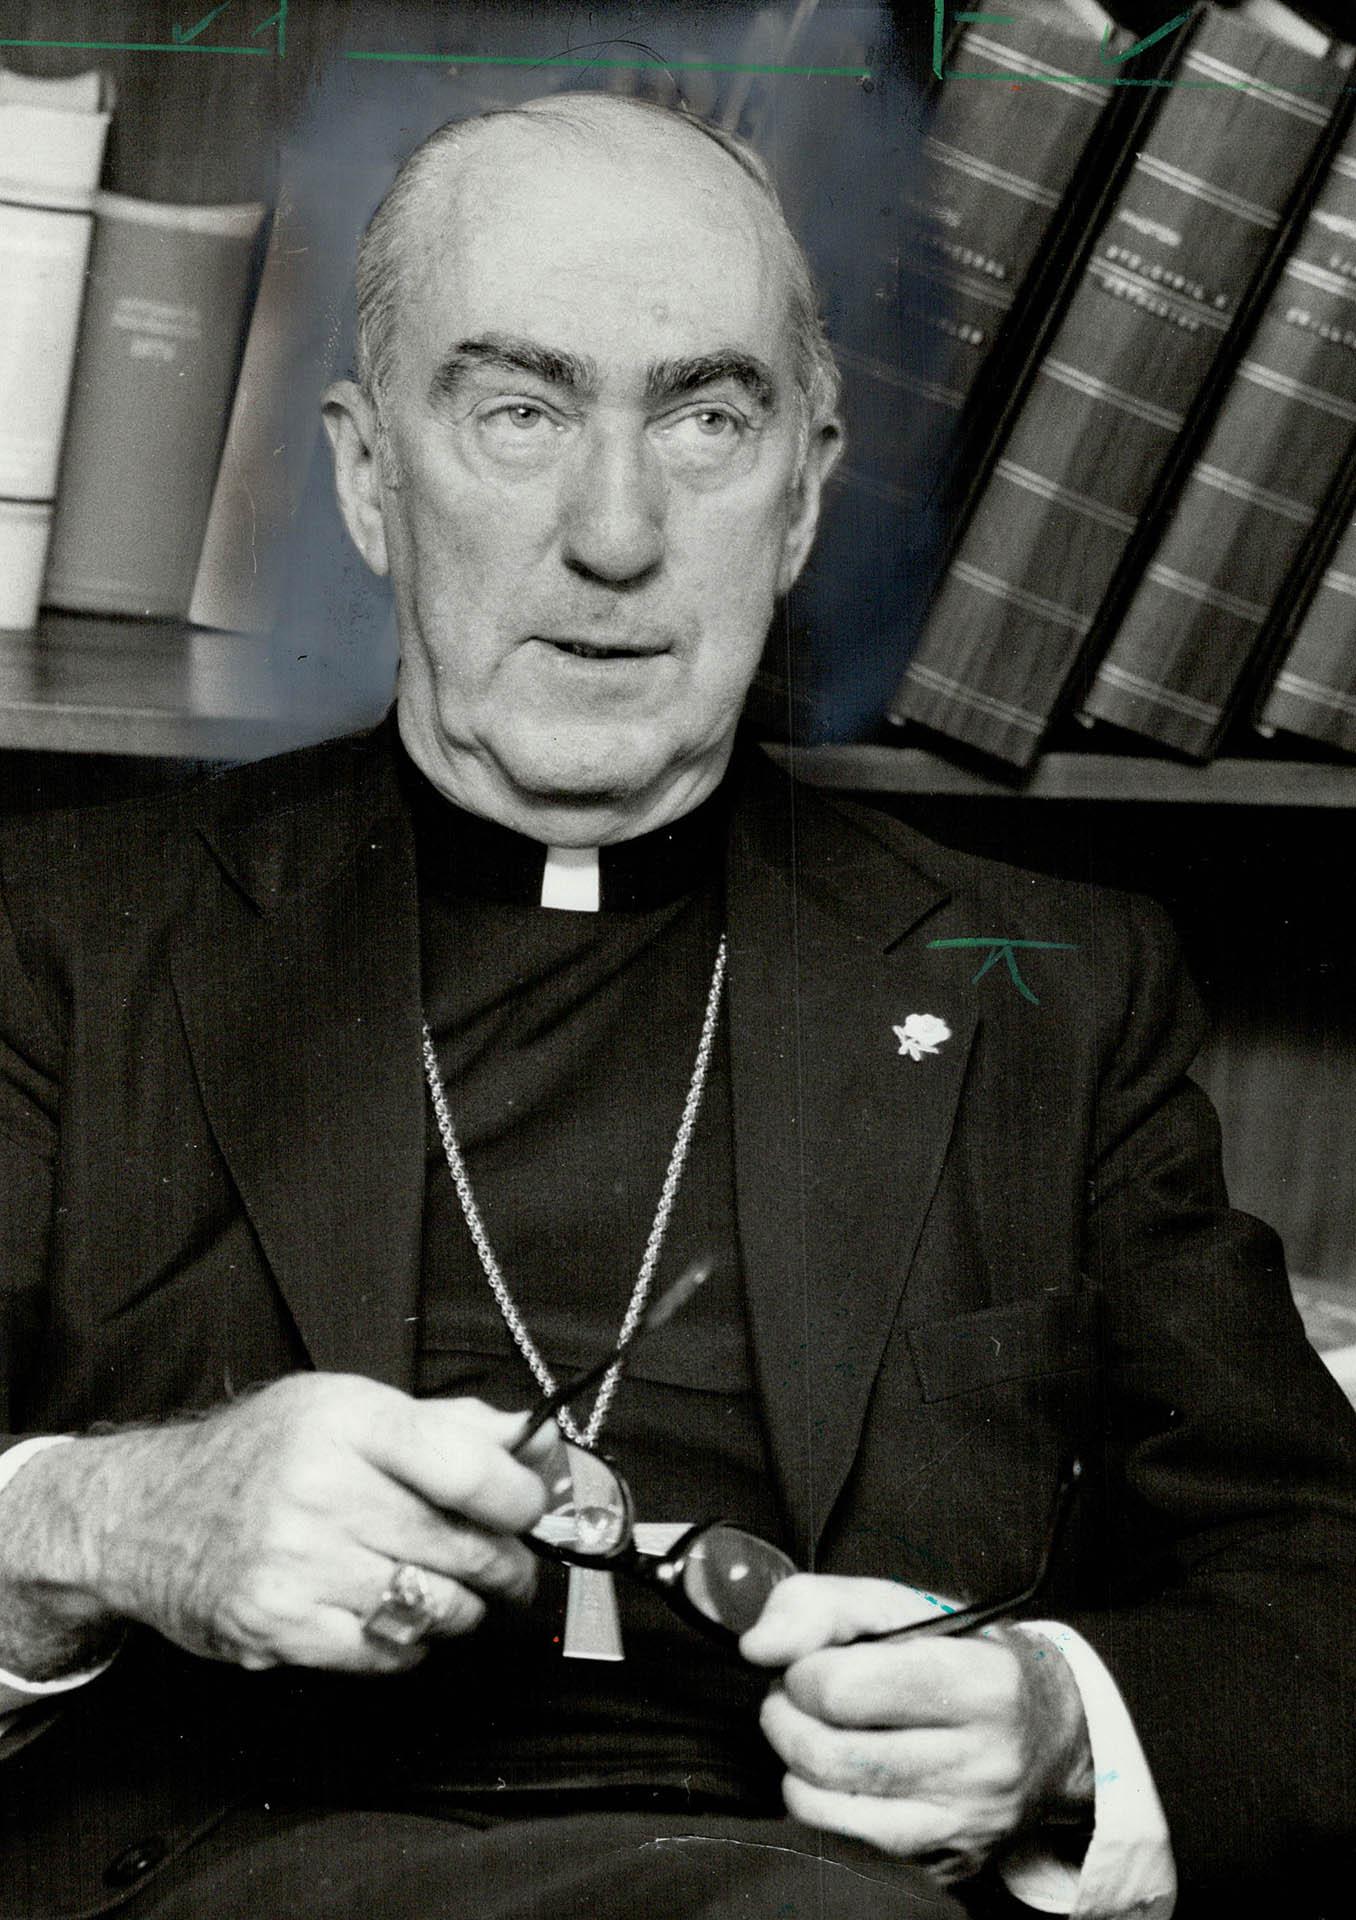 Cardinal Carter FOur of his have been implemented, six